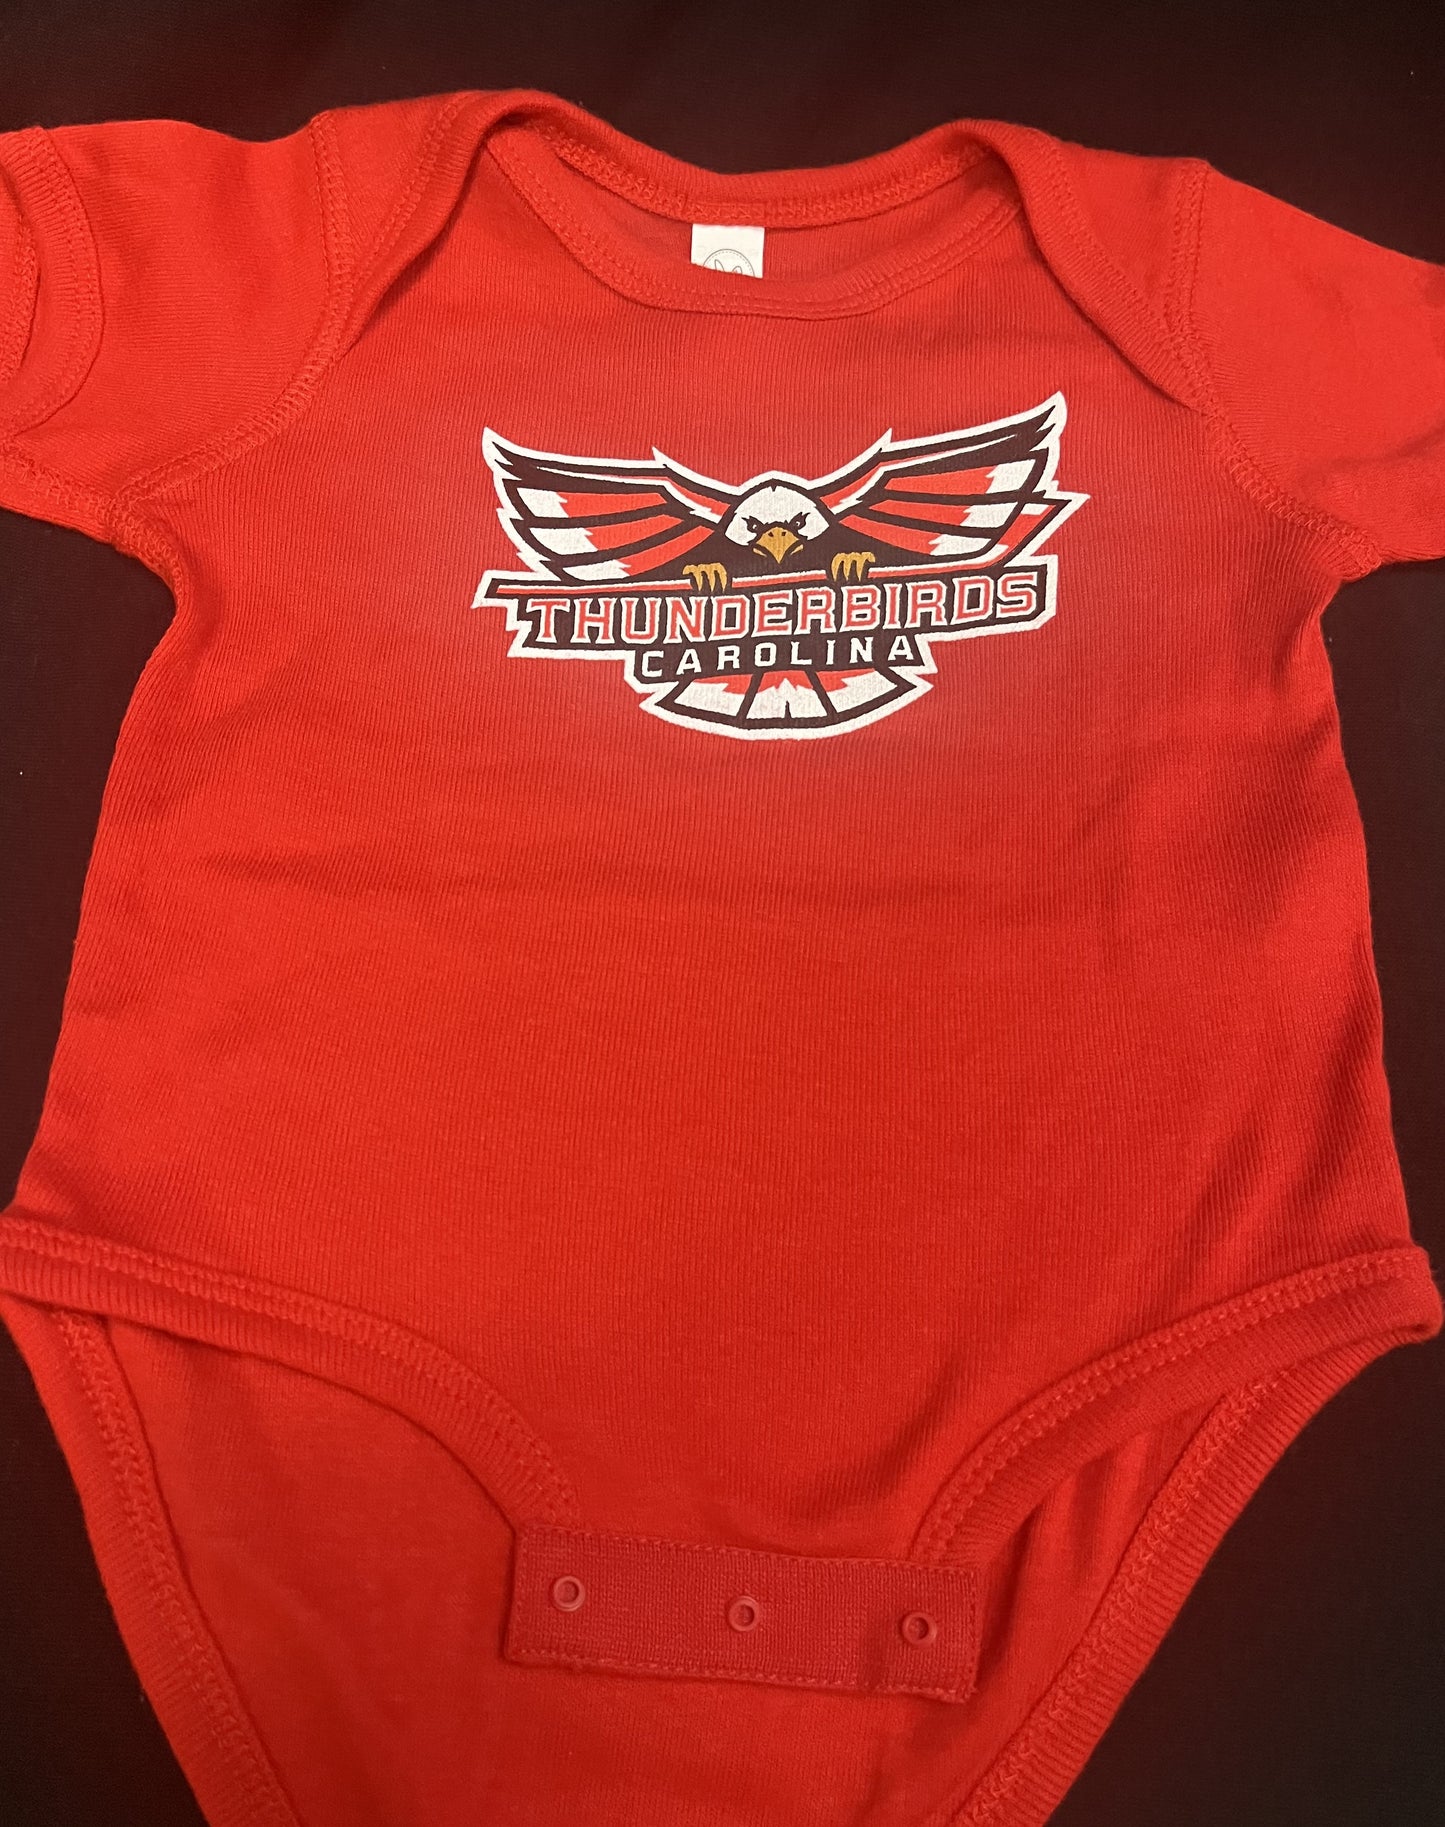 6 month old short sleeve w/Thunderbird Logo Black or Red